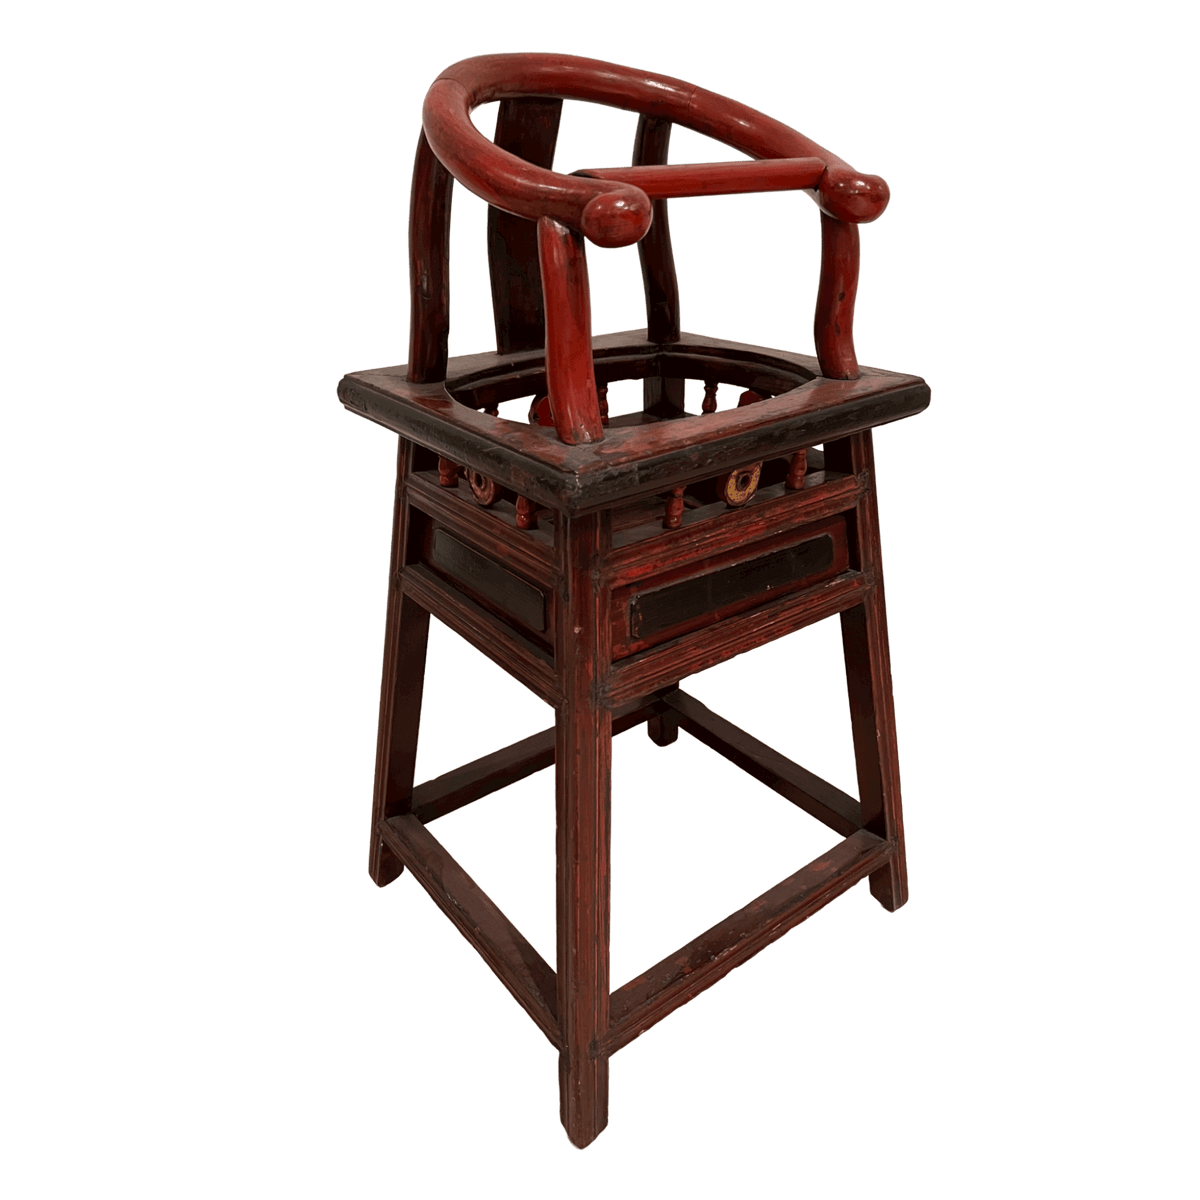 Antique Chinese High Chair